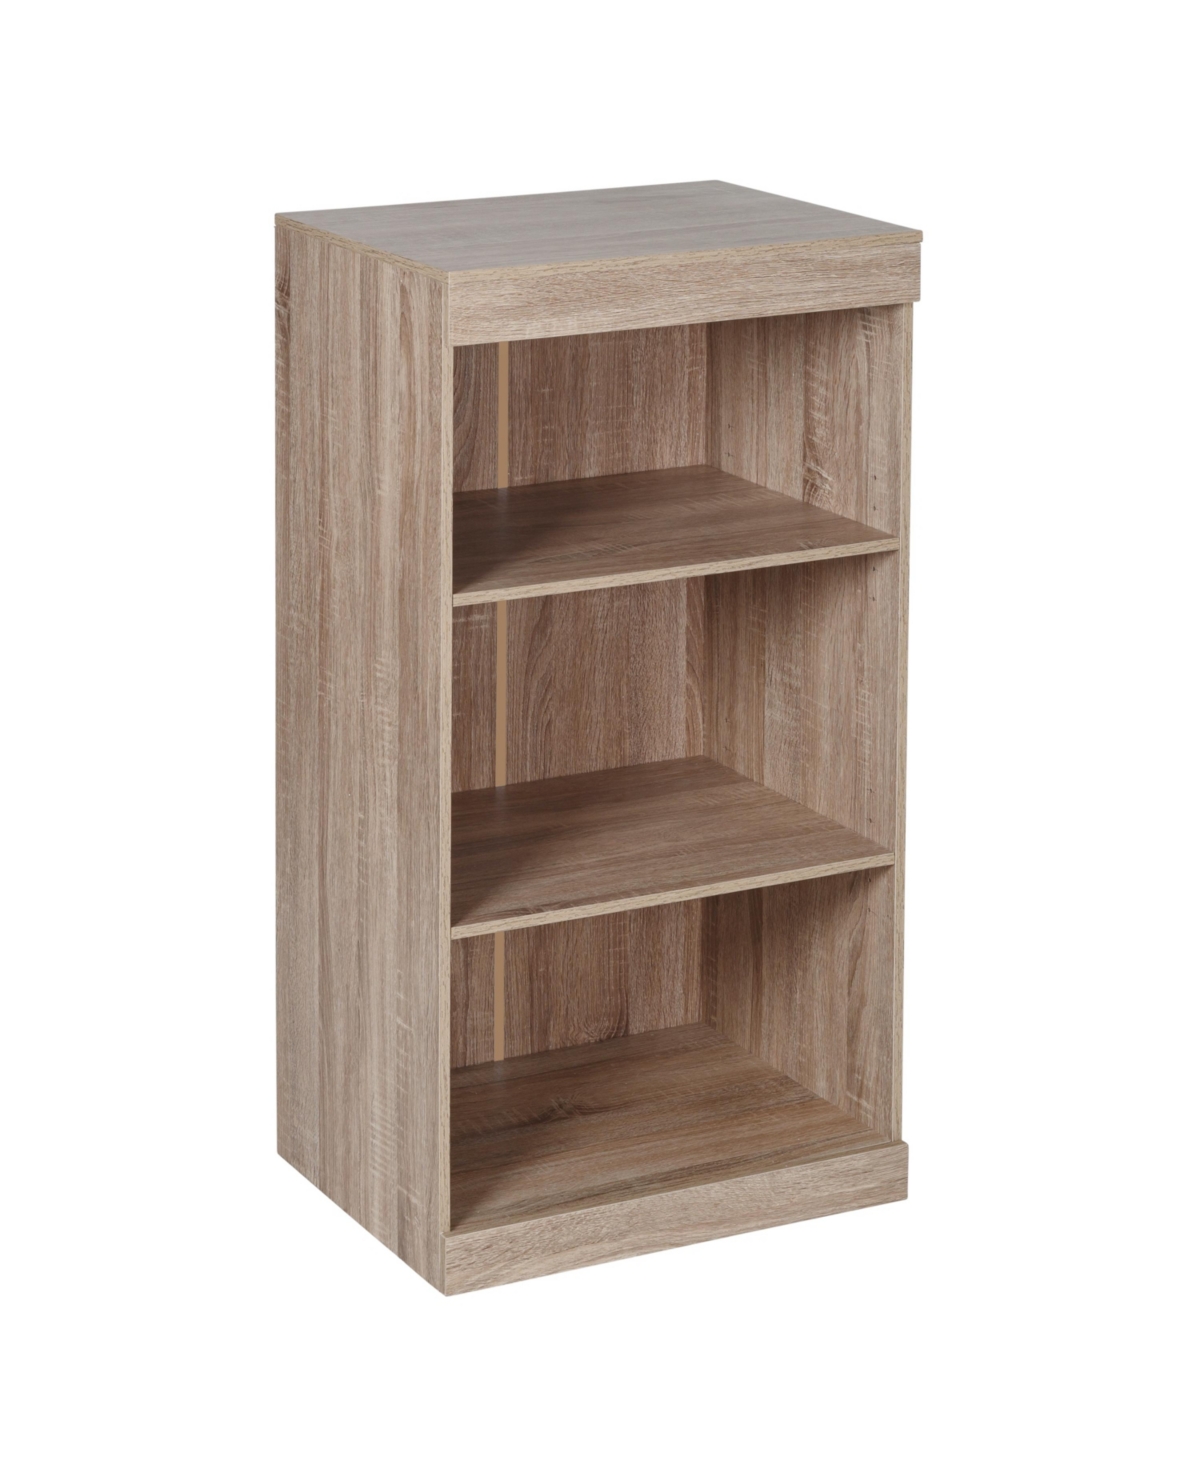 Honey Can Do Freestanding Stackable Shelf Unit With 2 Shelves And Wood Finish In Brown